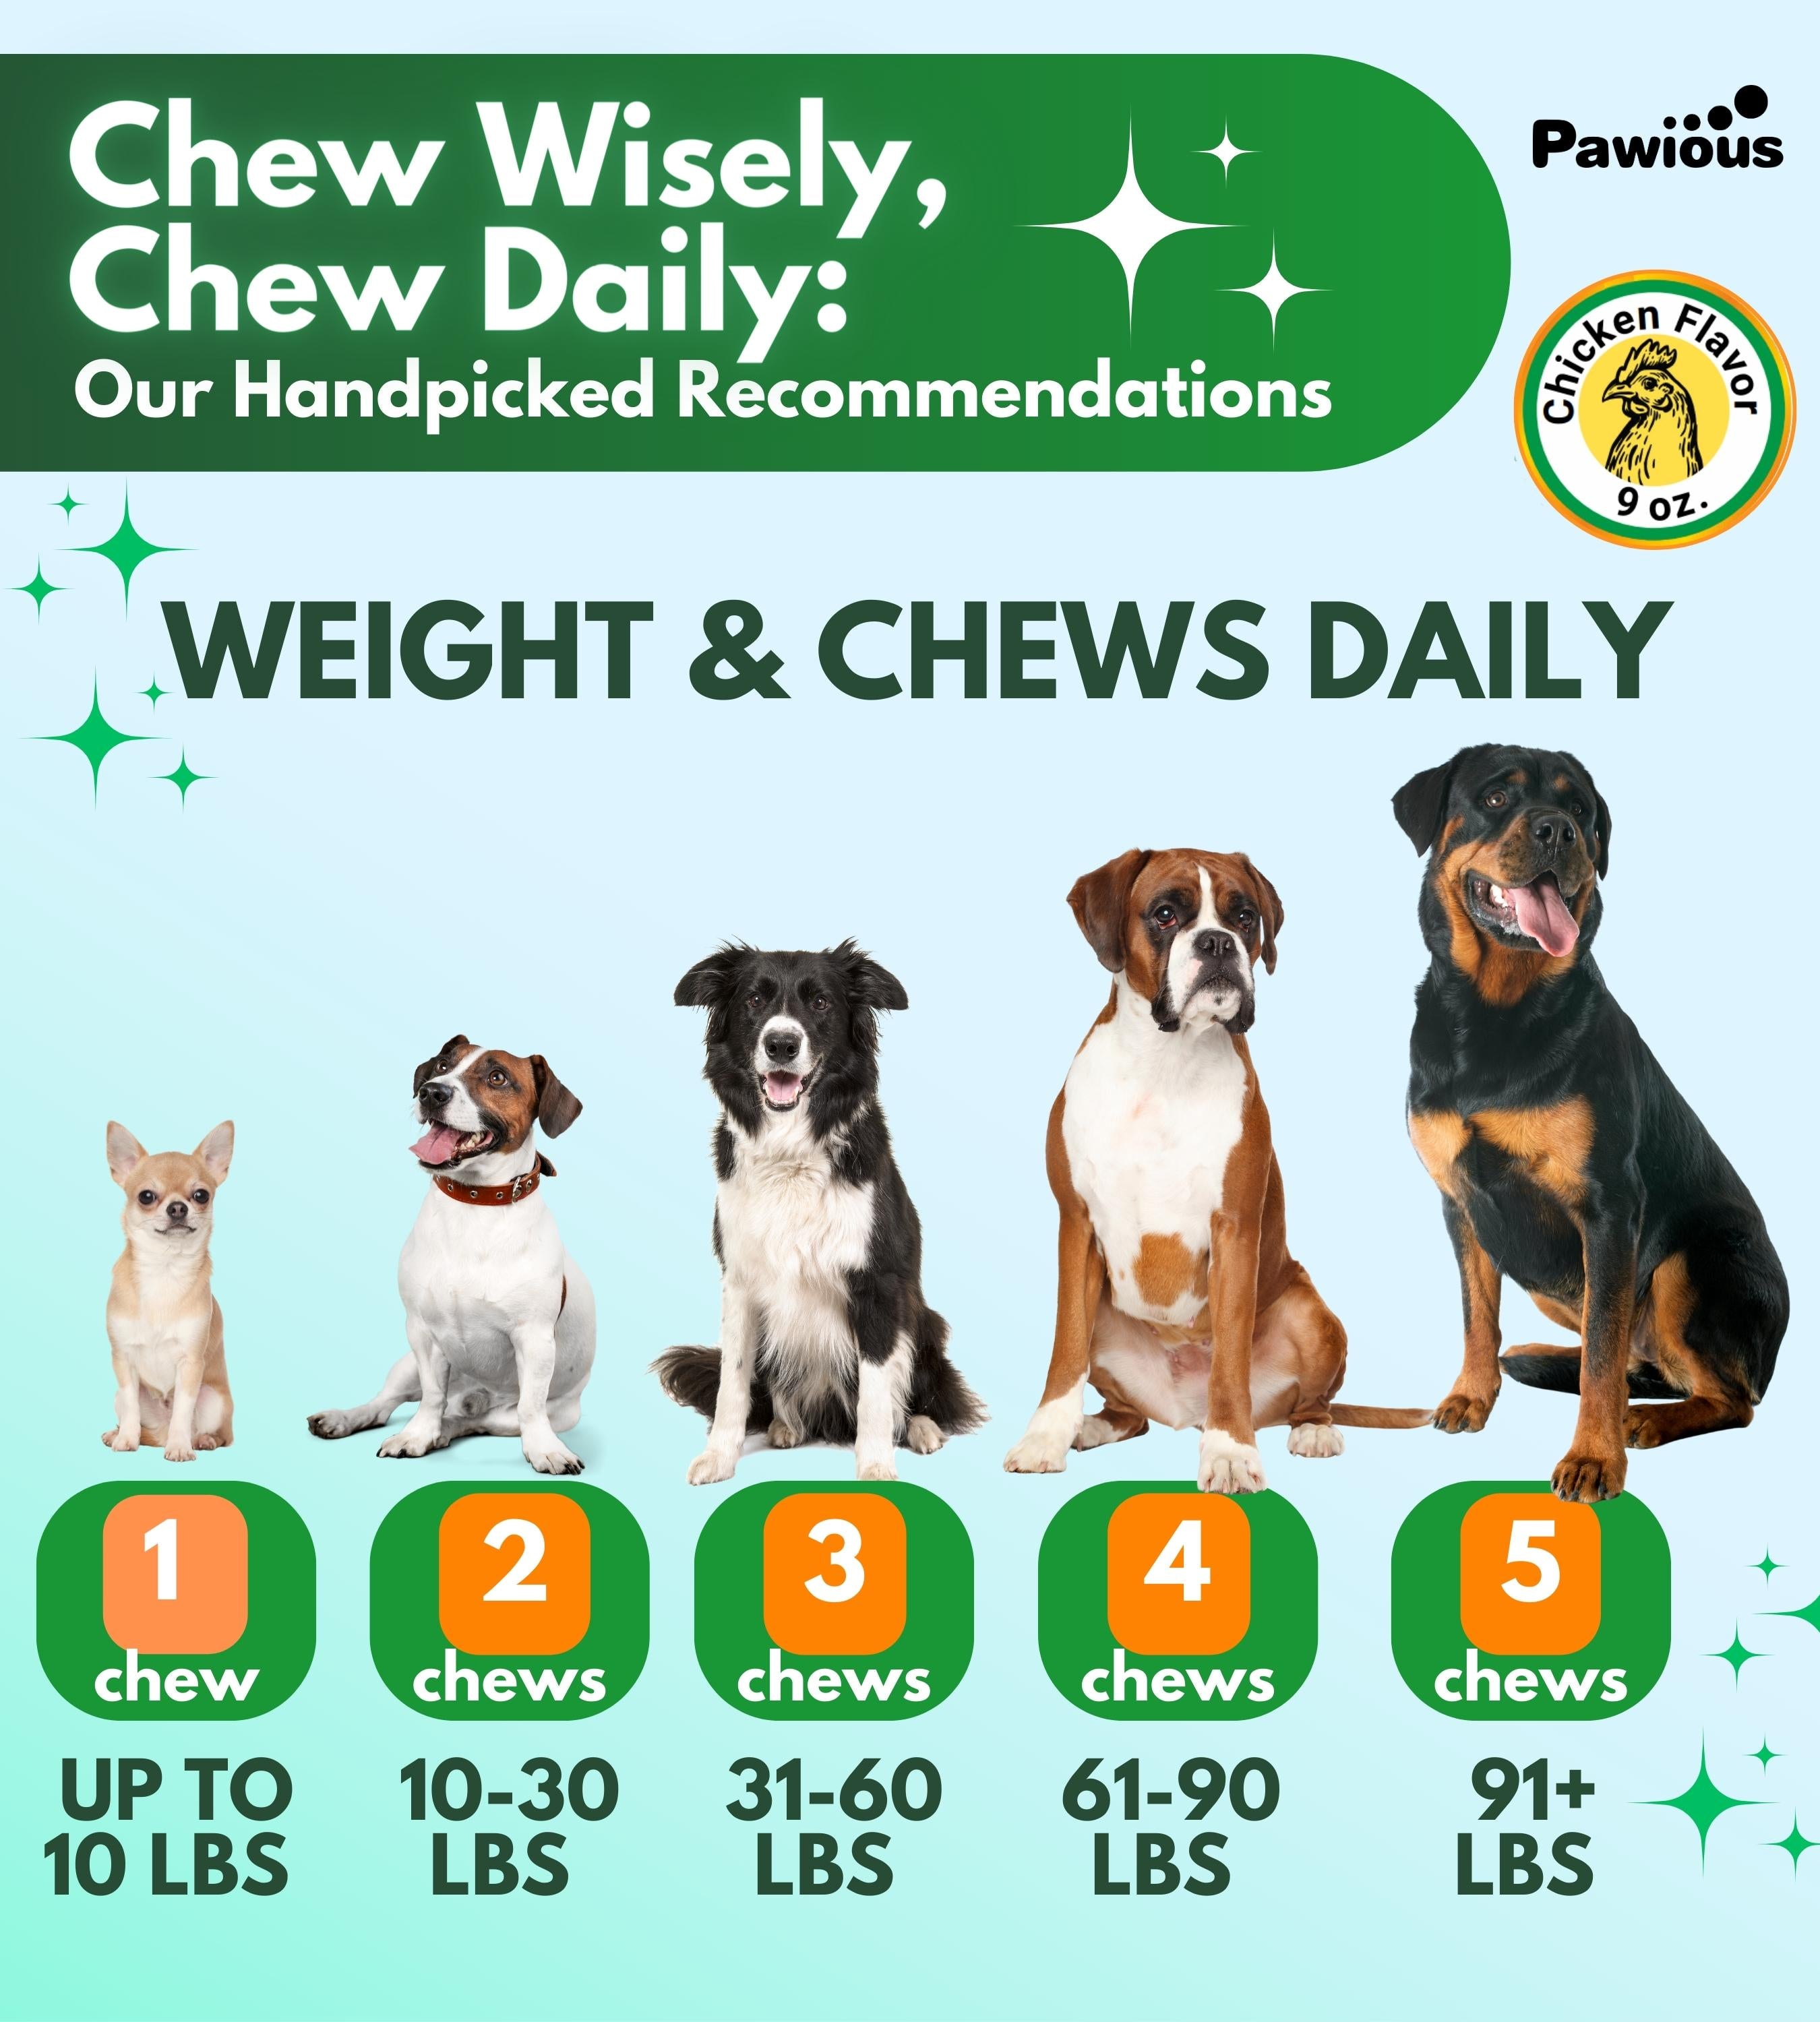 Hip and Joint Chews for Dogs - Glucosamine for Dogs - Dog Joint Pain Relief - Chondroitin, MSM, Turmeric, Hemp Treats - Mobility Bites